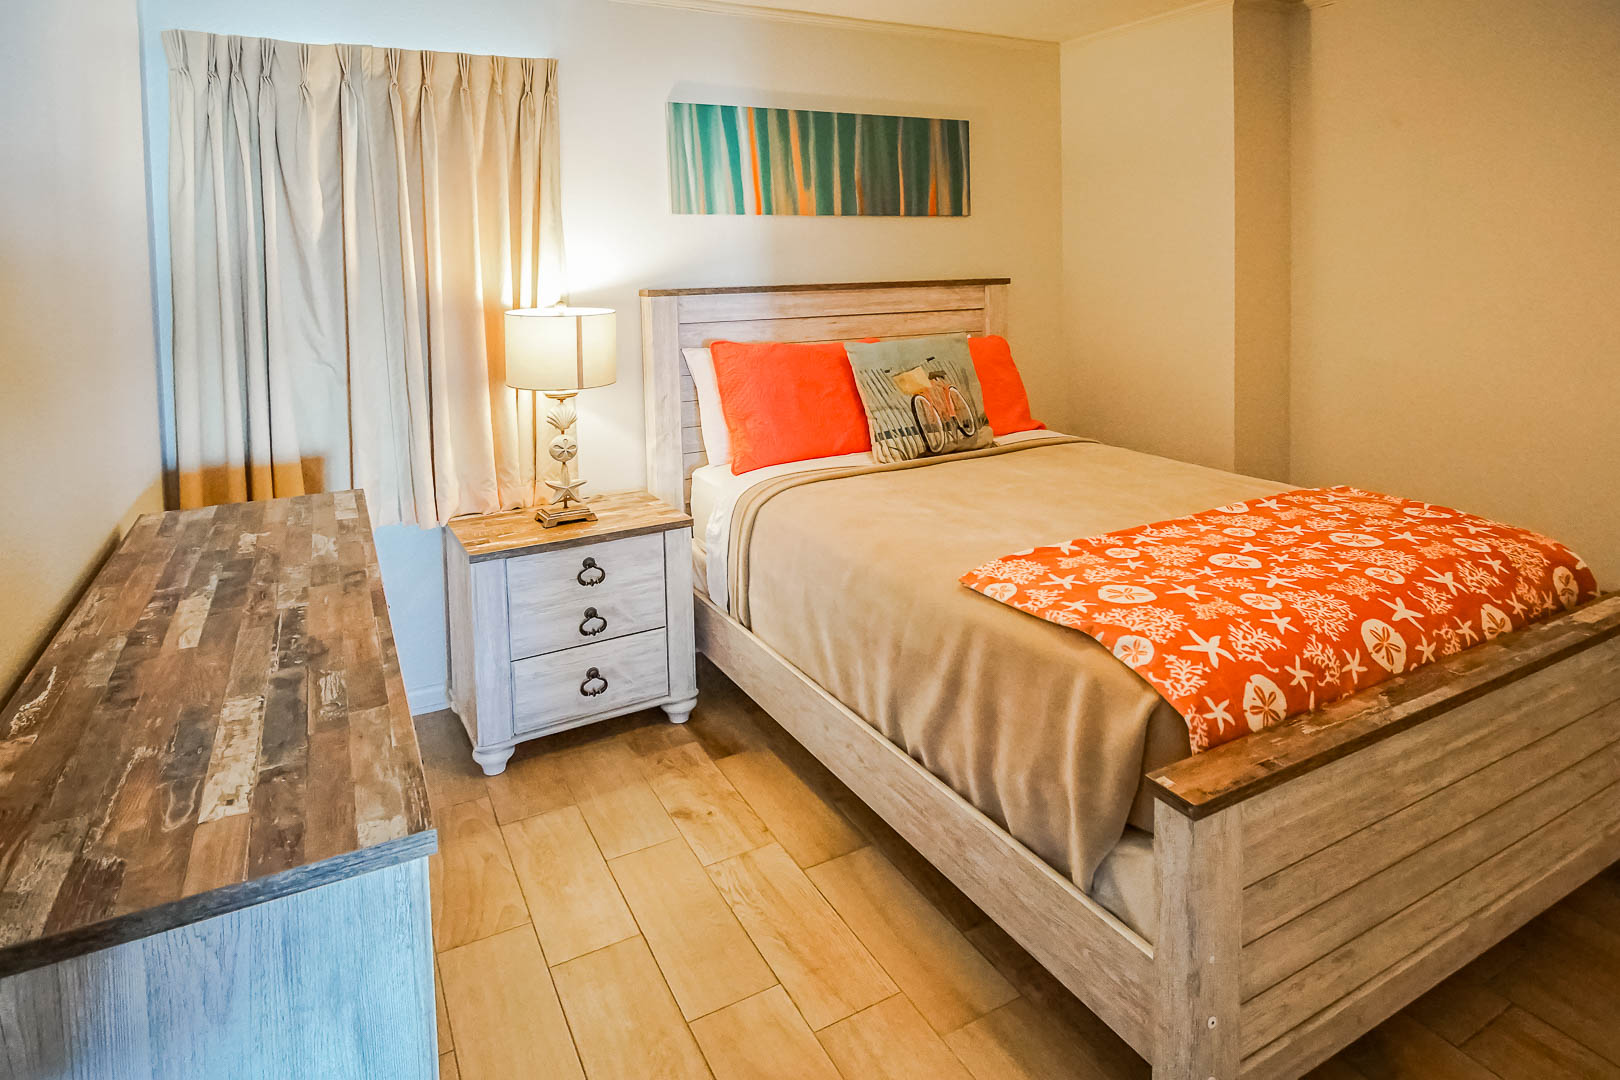 A vibrant bedroom at VRI's Shoreline Towers in Gulf Shores, Alabama.